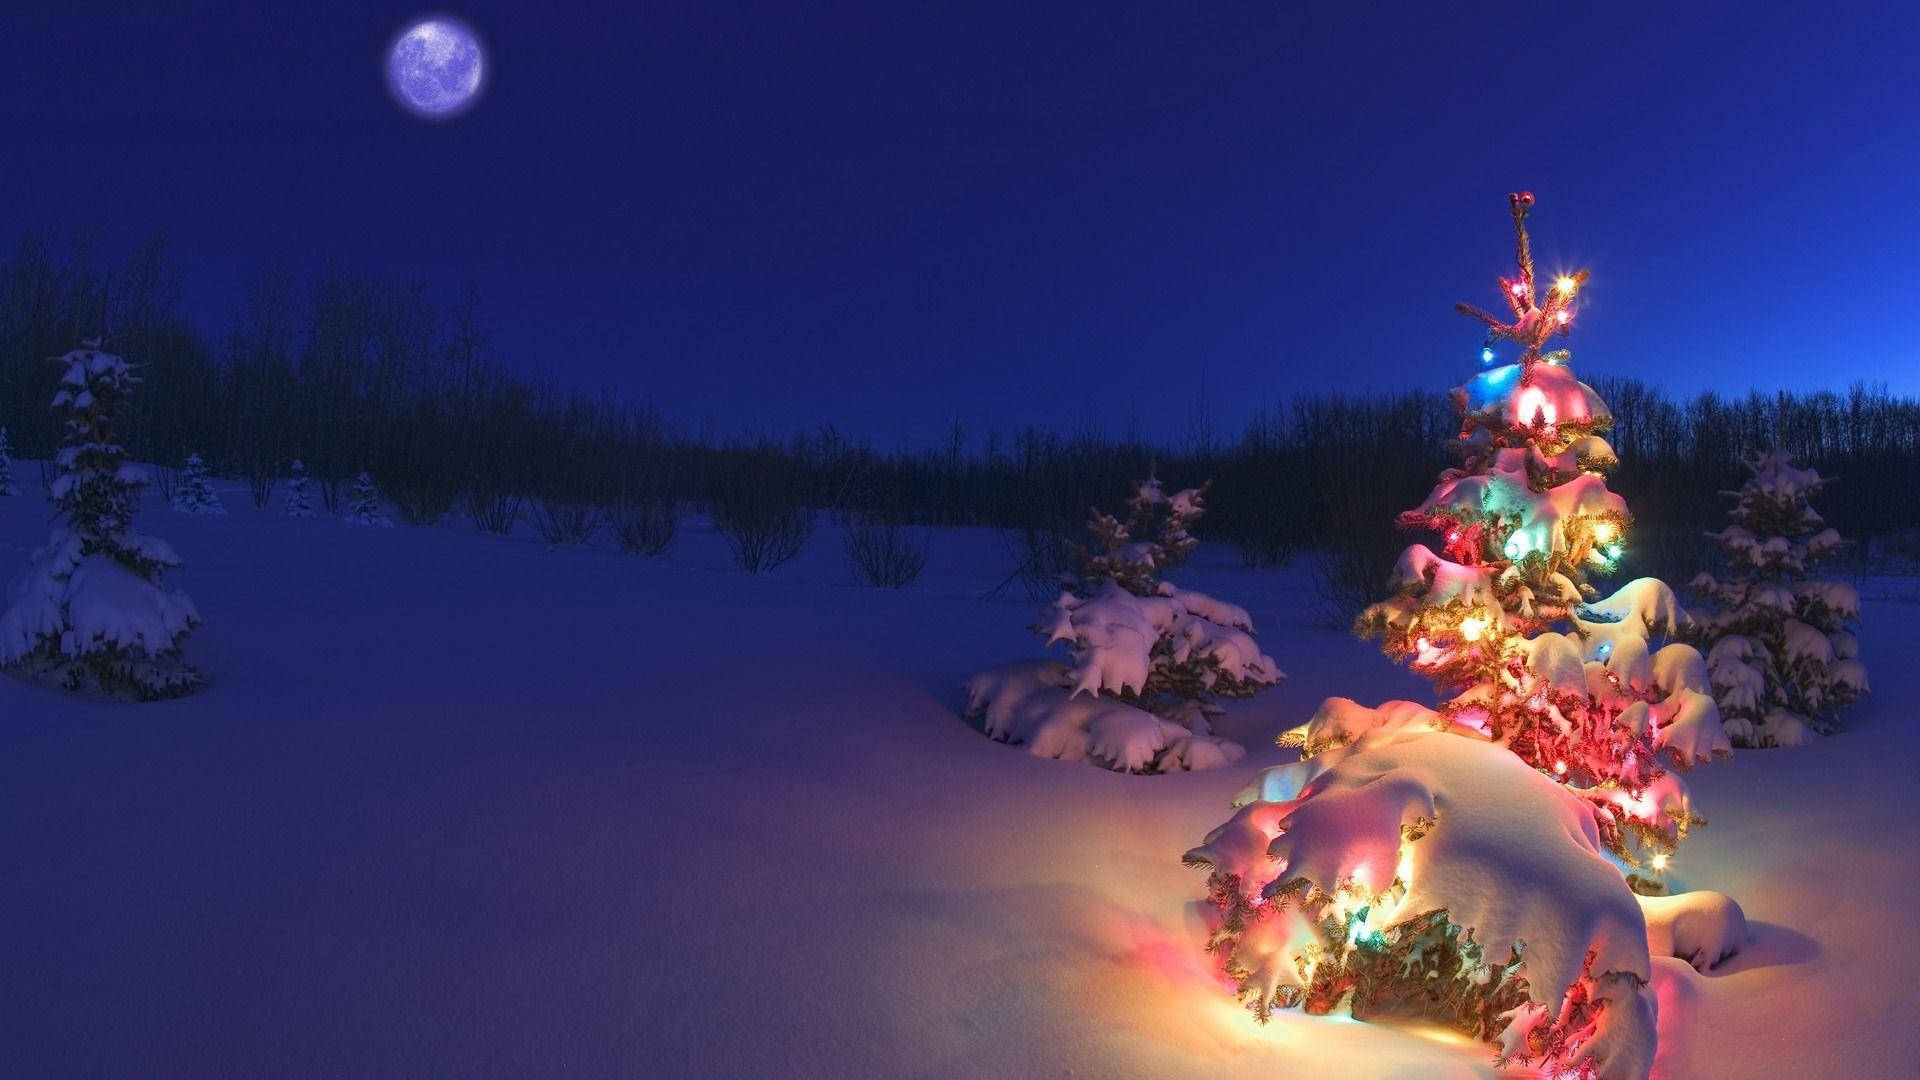 Brighten up the Holiday Season with a Christmas Tree Wallpaper